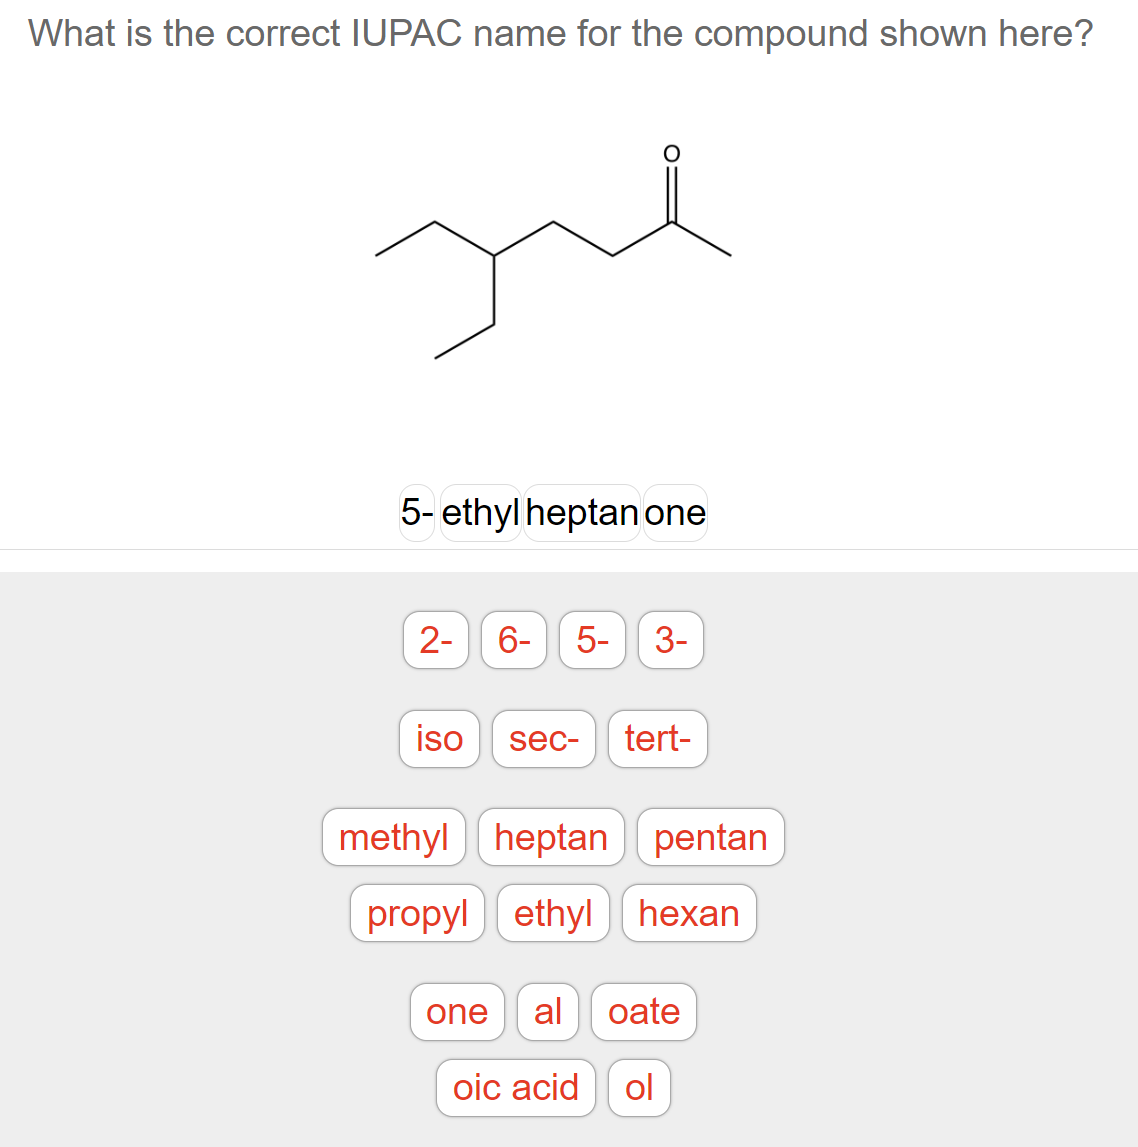 What is the correct IUPAC name for the compound shown here?
Jul
5-ethylheptan one
2-
6- 5- 3-
iso
sec- tert-
methylheptan pentan
propyl ethylhexan
one al oate
oic acid ol